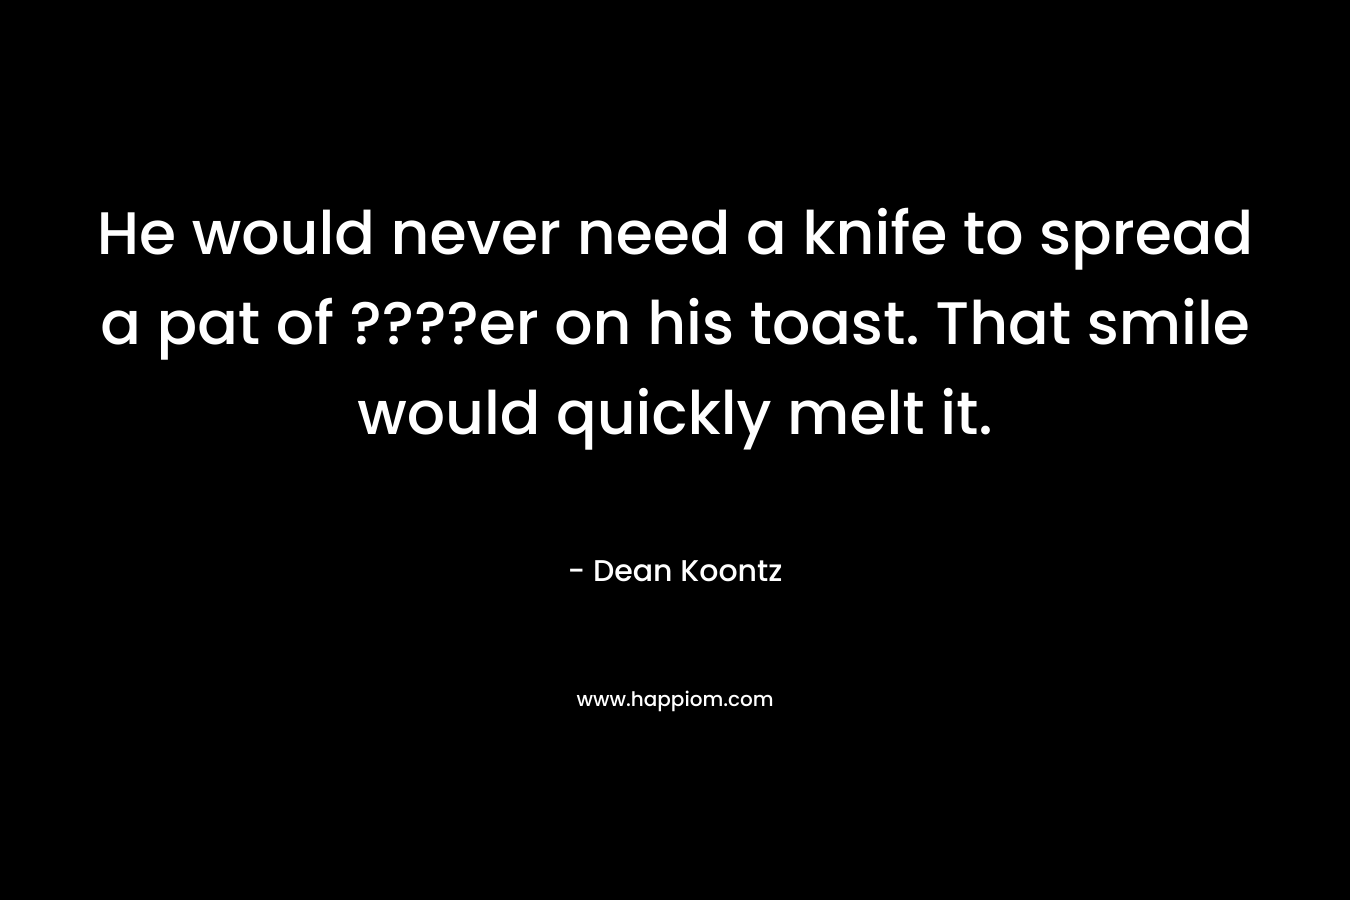 He would never need a knife to spread a pat of ????er on his toast. That smile would quickly melt it. – Dean Koontz